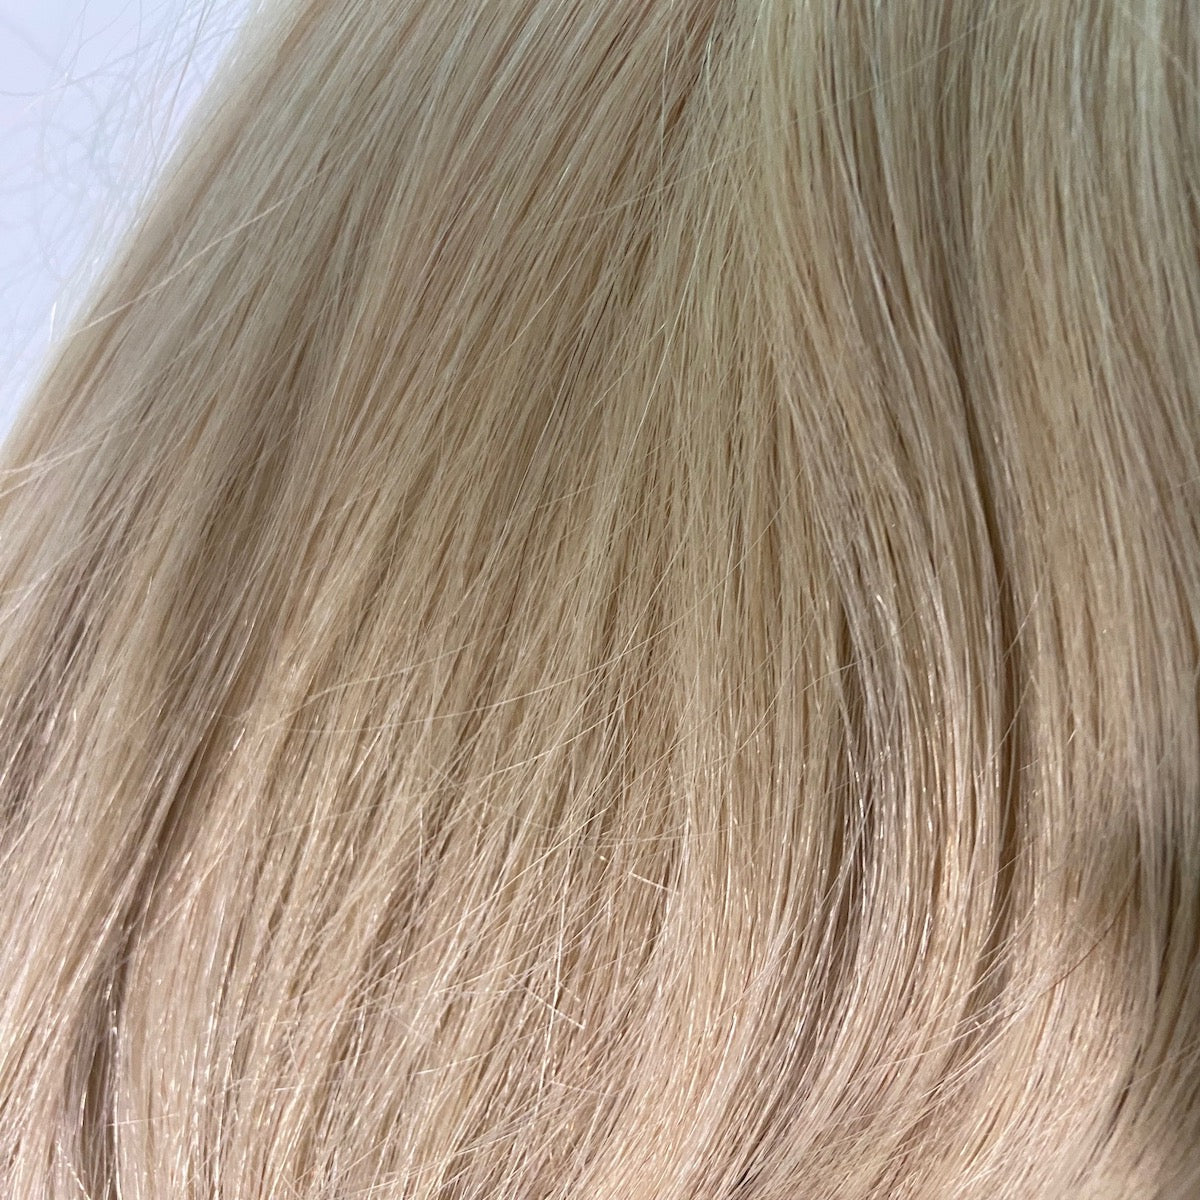 Tape-In 22" 50g Professional Hair Extensions - #16 Vanilla Blonde